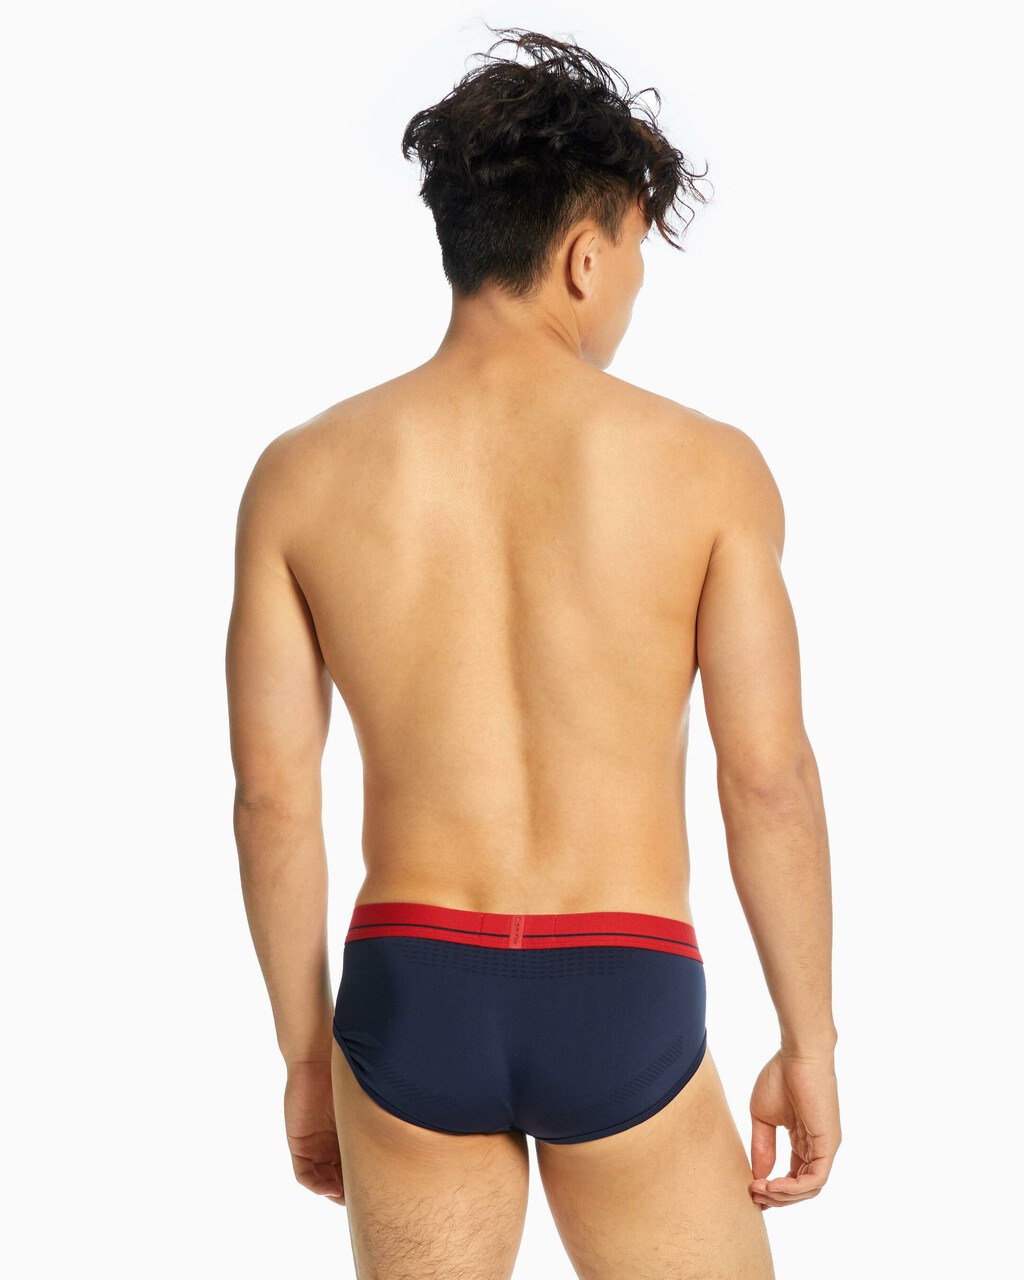 PRO FIT MICRO HIPSTER BRIEF, Blue Shadow, hi-res